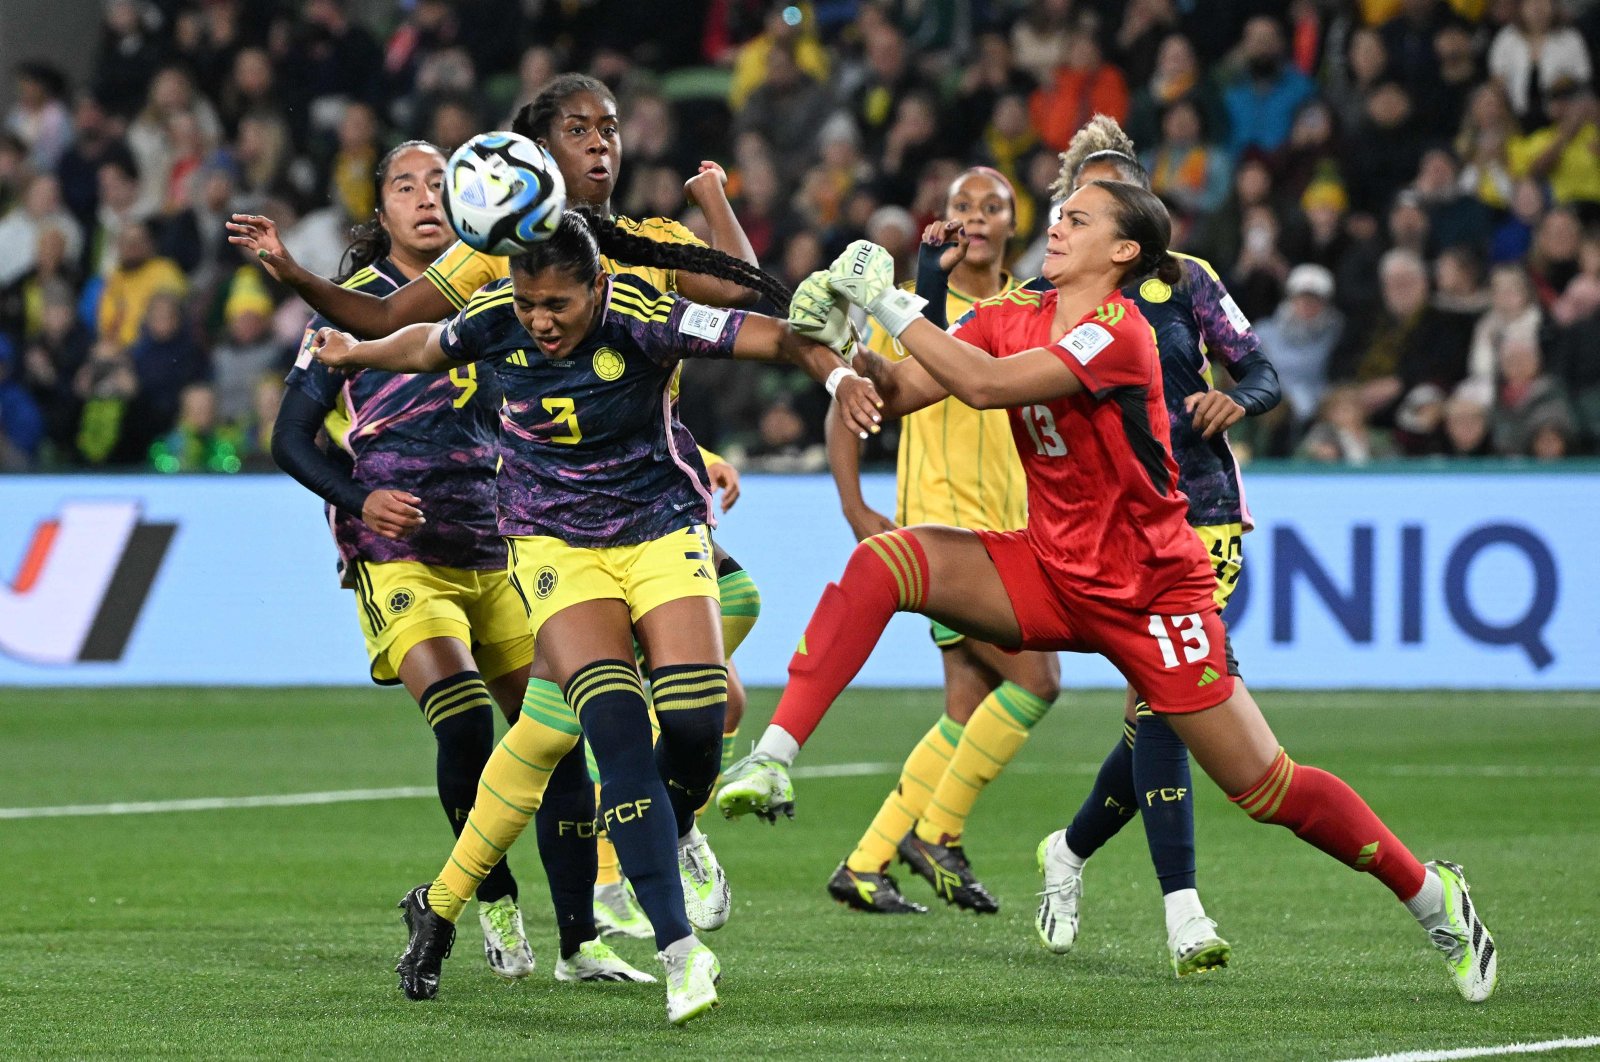 Jamaica&#039;s goalkeeper (R) Rebecca Spencer clears the ball past Colombia&#039;s defender Daniela Arias during the Women&#039;s World Cup round of 16 match at Melbourne Rectangular Stadium, Melbourne, Australia, Aug. 8, 2023. (AFP Photo)